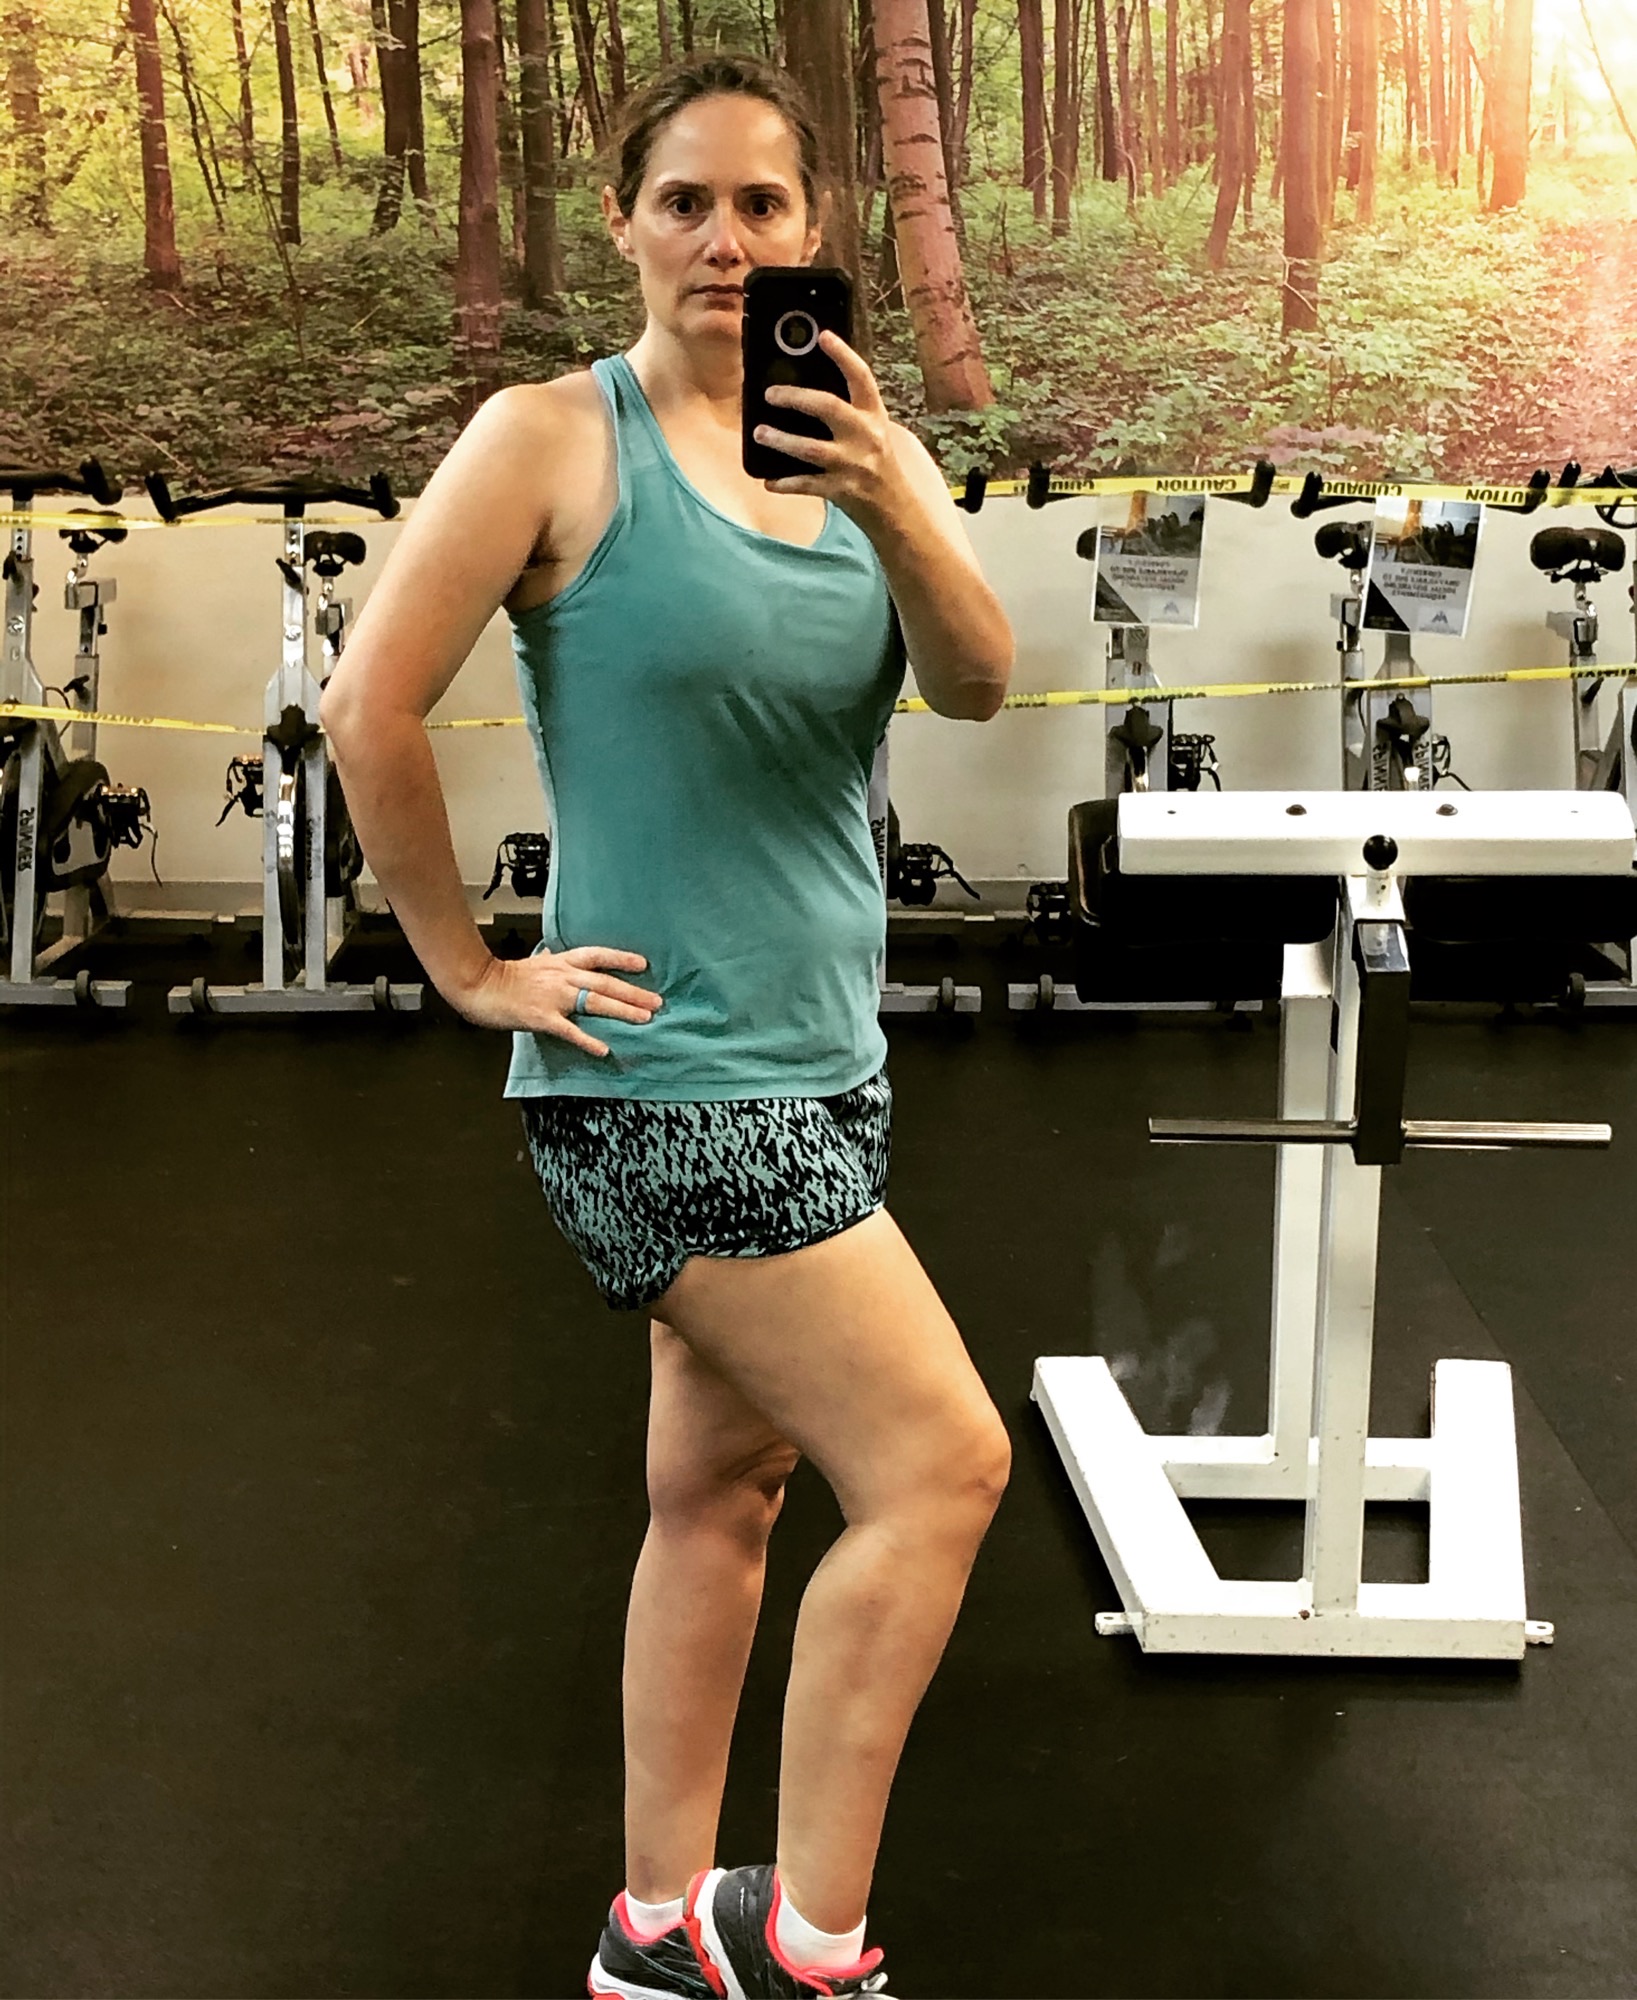 Renee's journey as a busy mom trying to lose weight